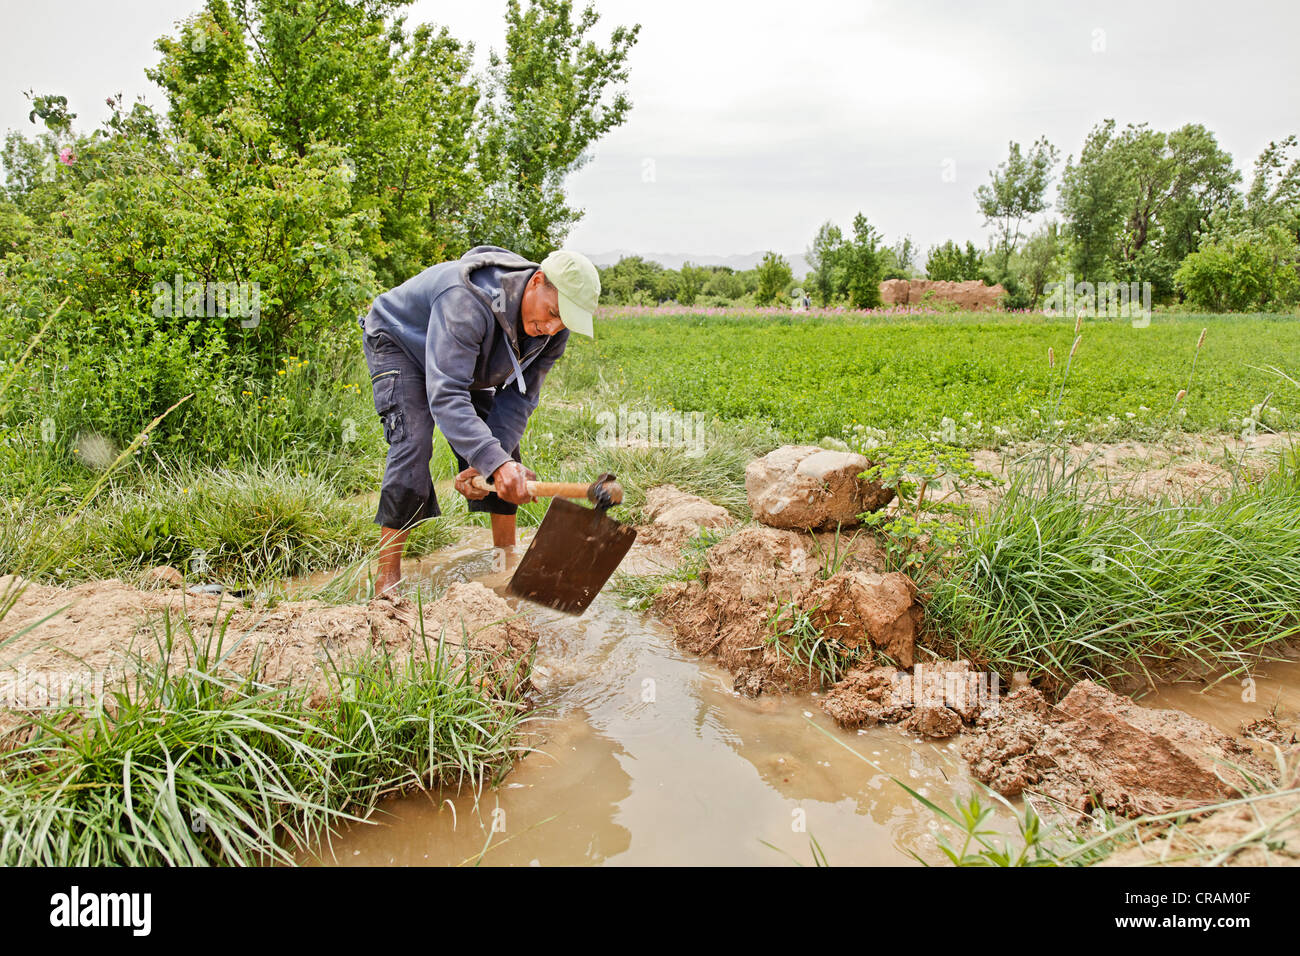 Man digging with a hoe to redirect an irrigation canal in an oasis where Damask Roses (Rosa damascena) are organically grown Stock Photo